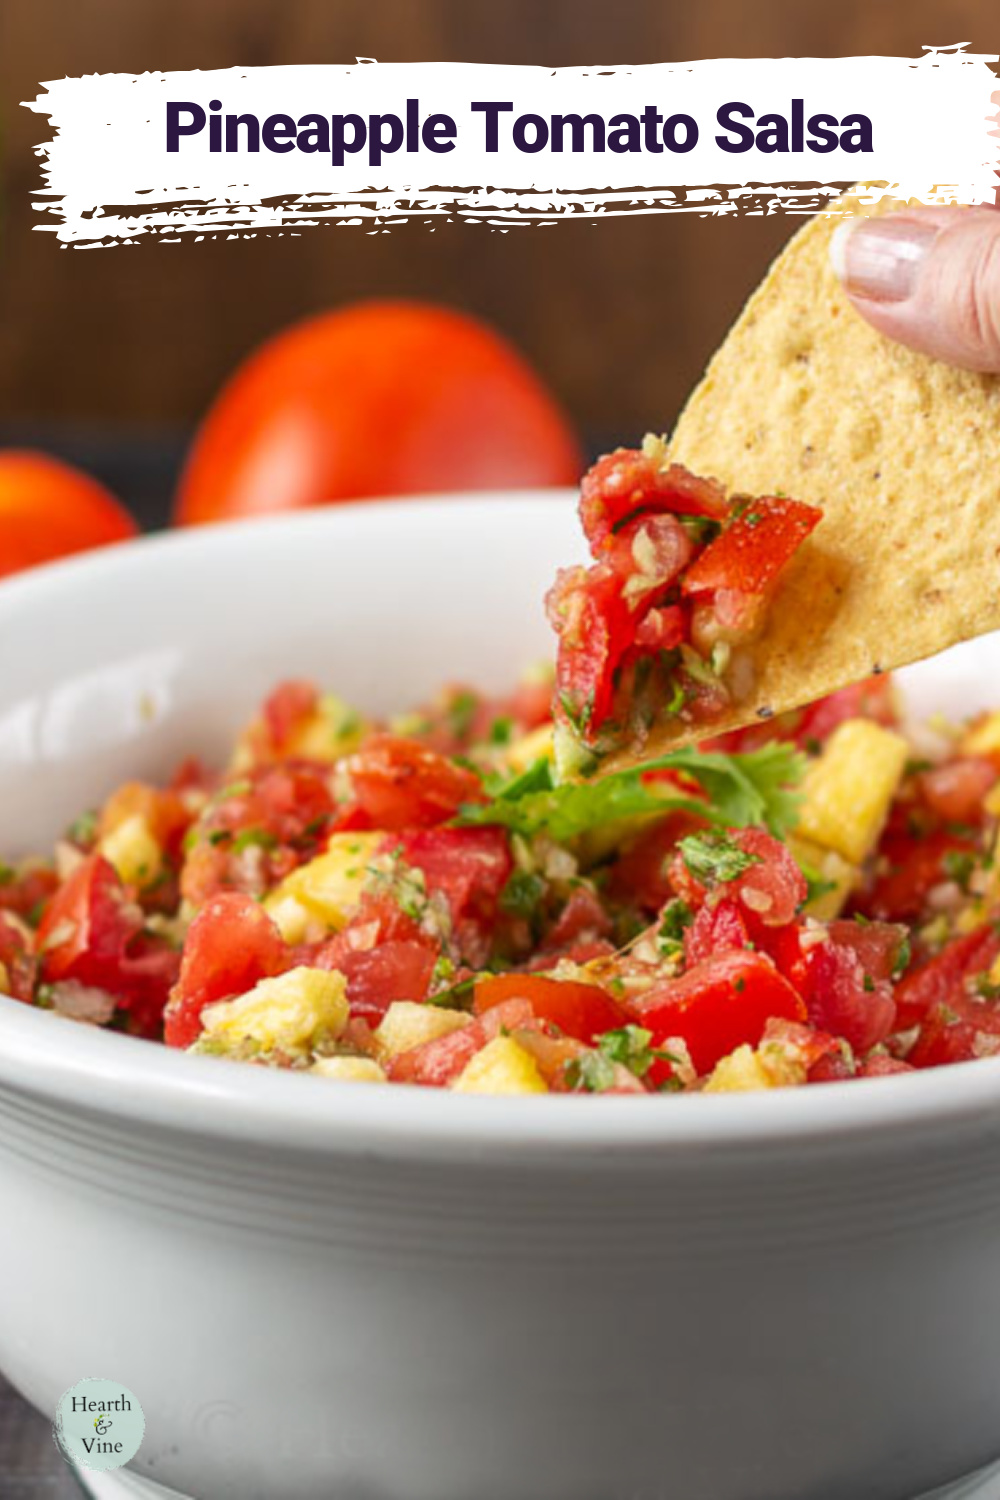 Tortilla chip lifting some pineapple salsa from a bowl.